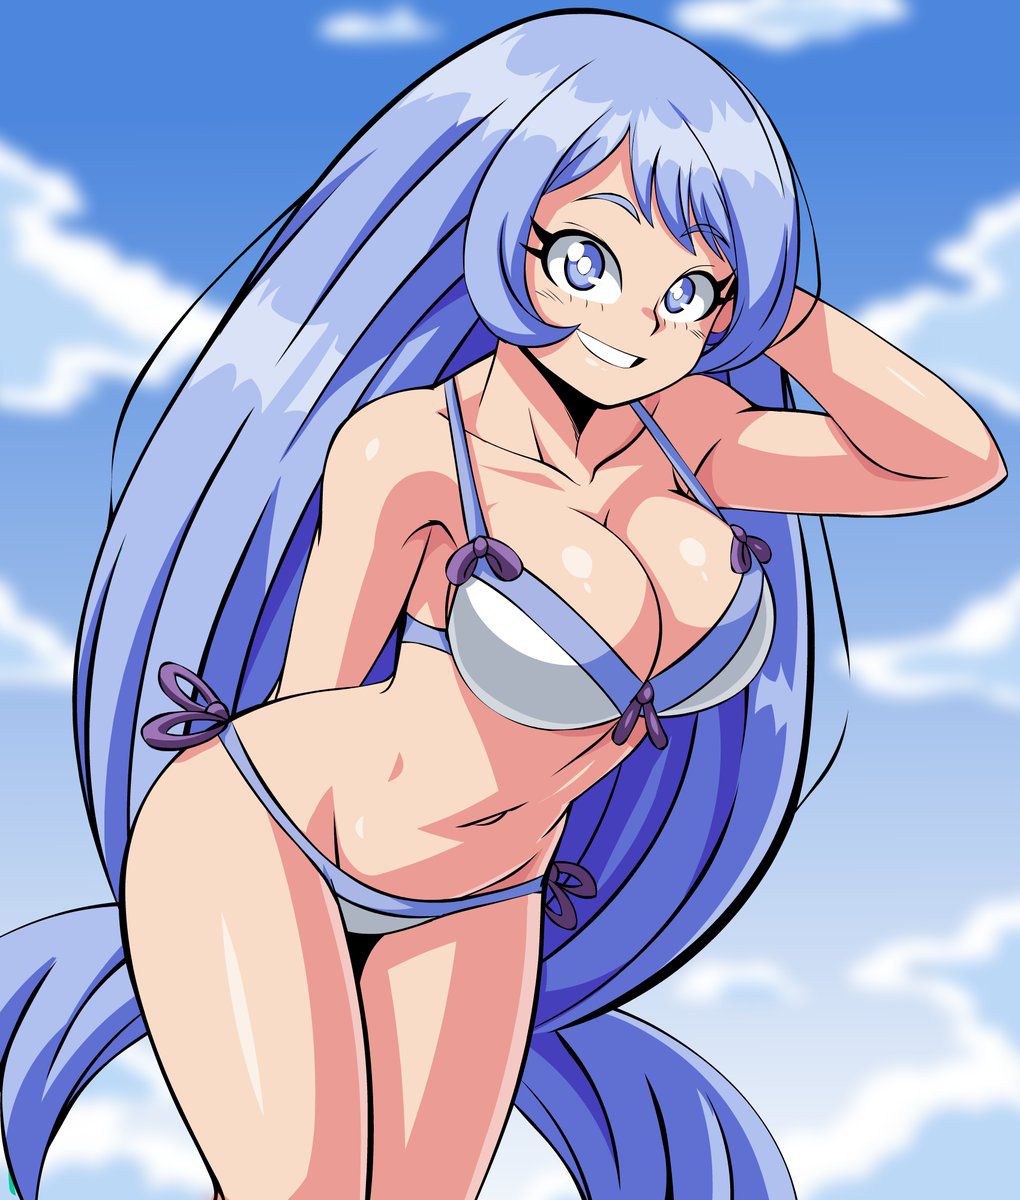 Erotic image of "blue hair beauty" that does not exist in reality even if it is a staple of water attribute character in fantasy 51